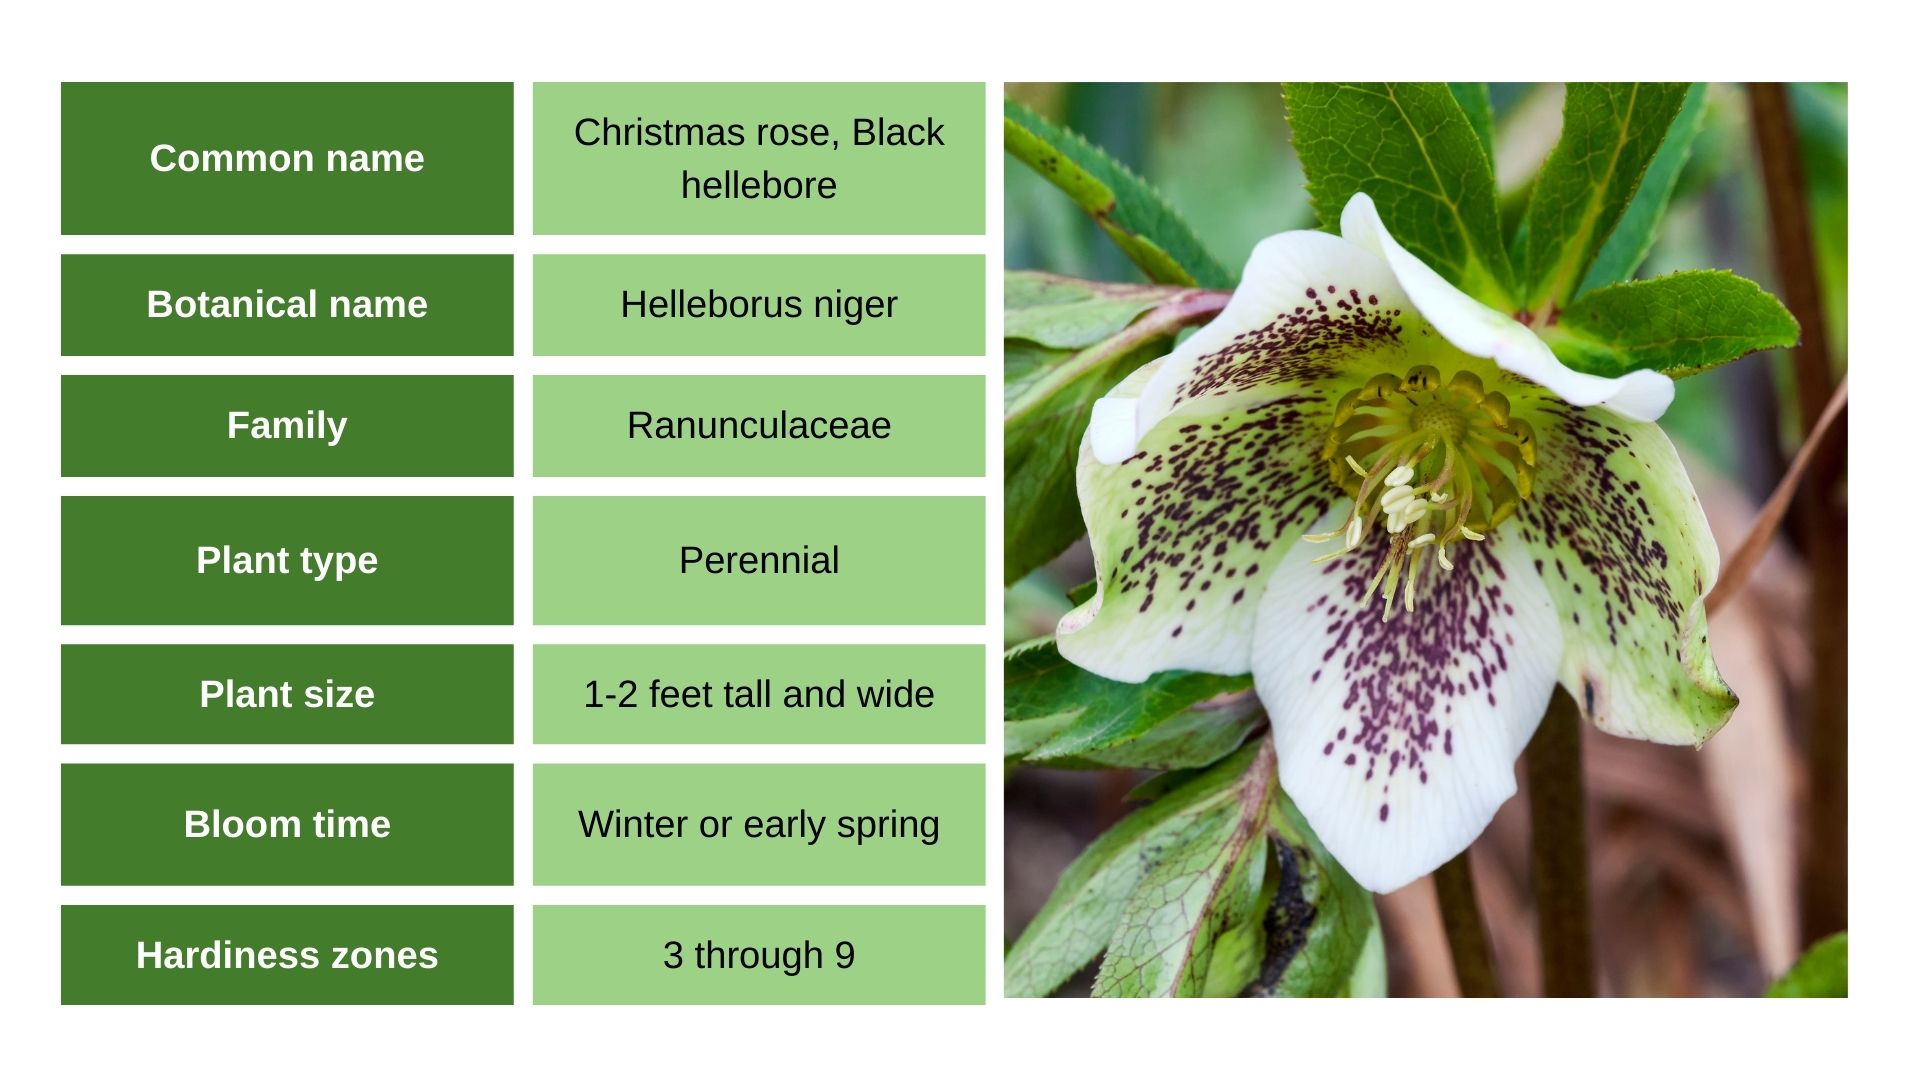 Christmas Rose info and photo